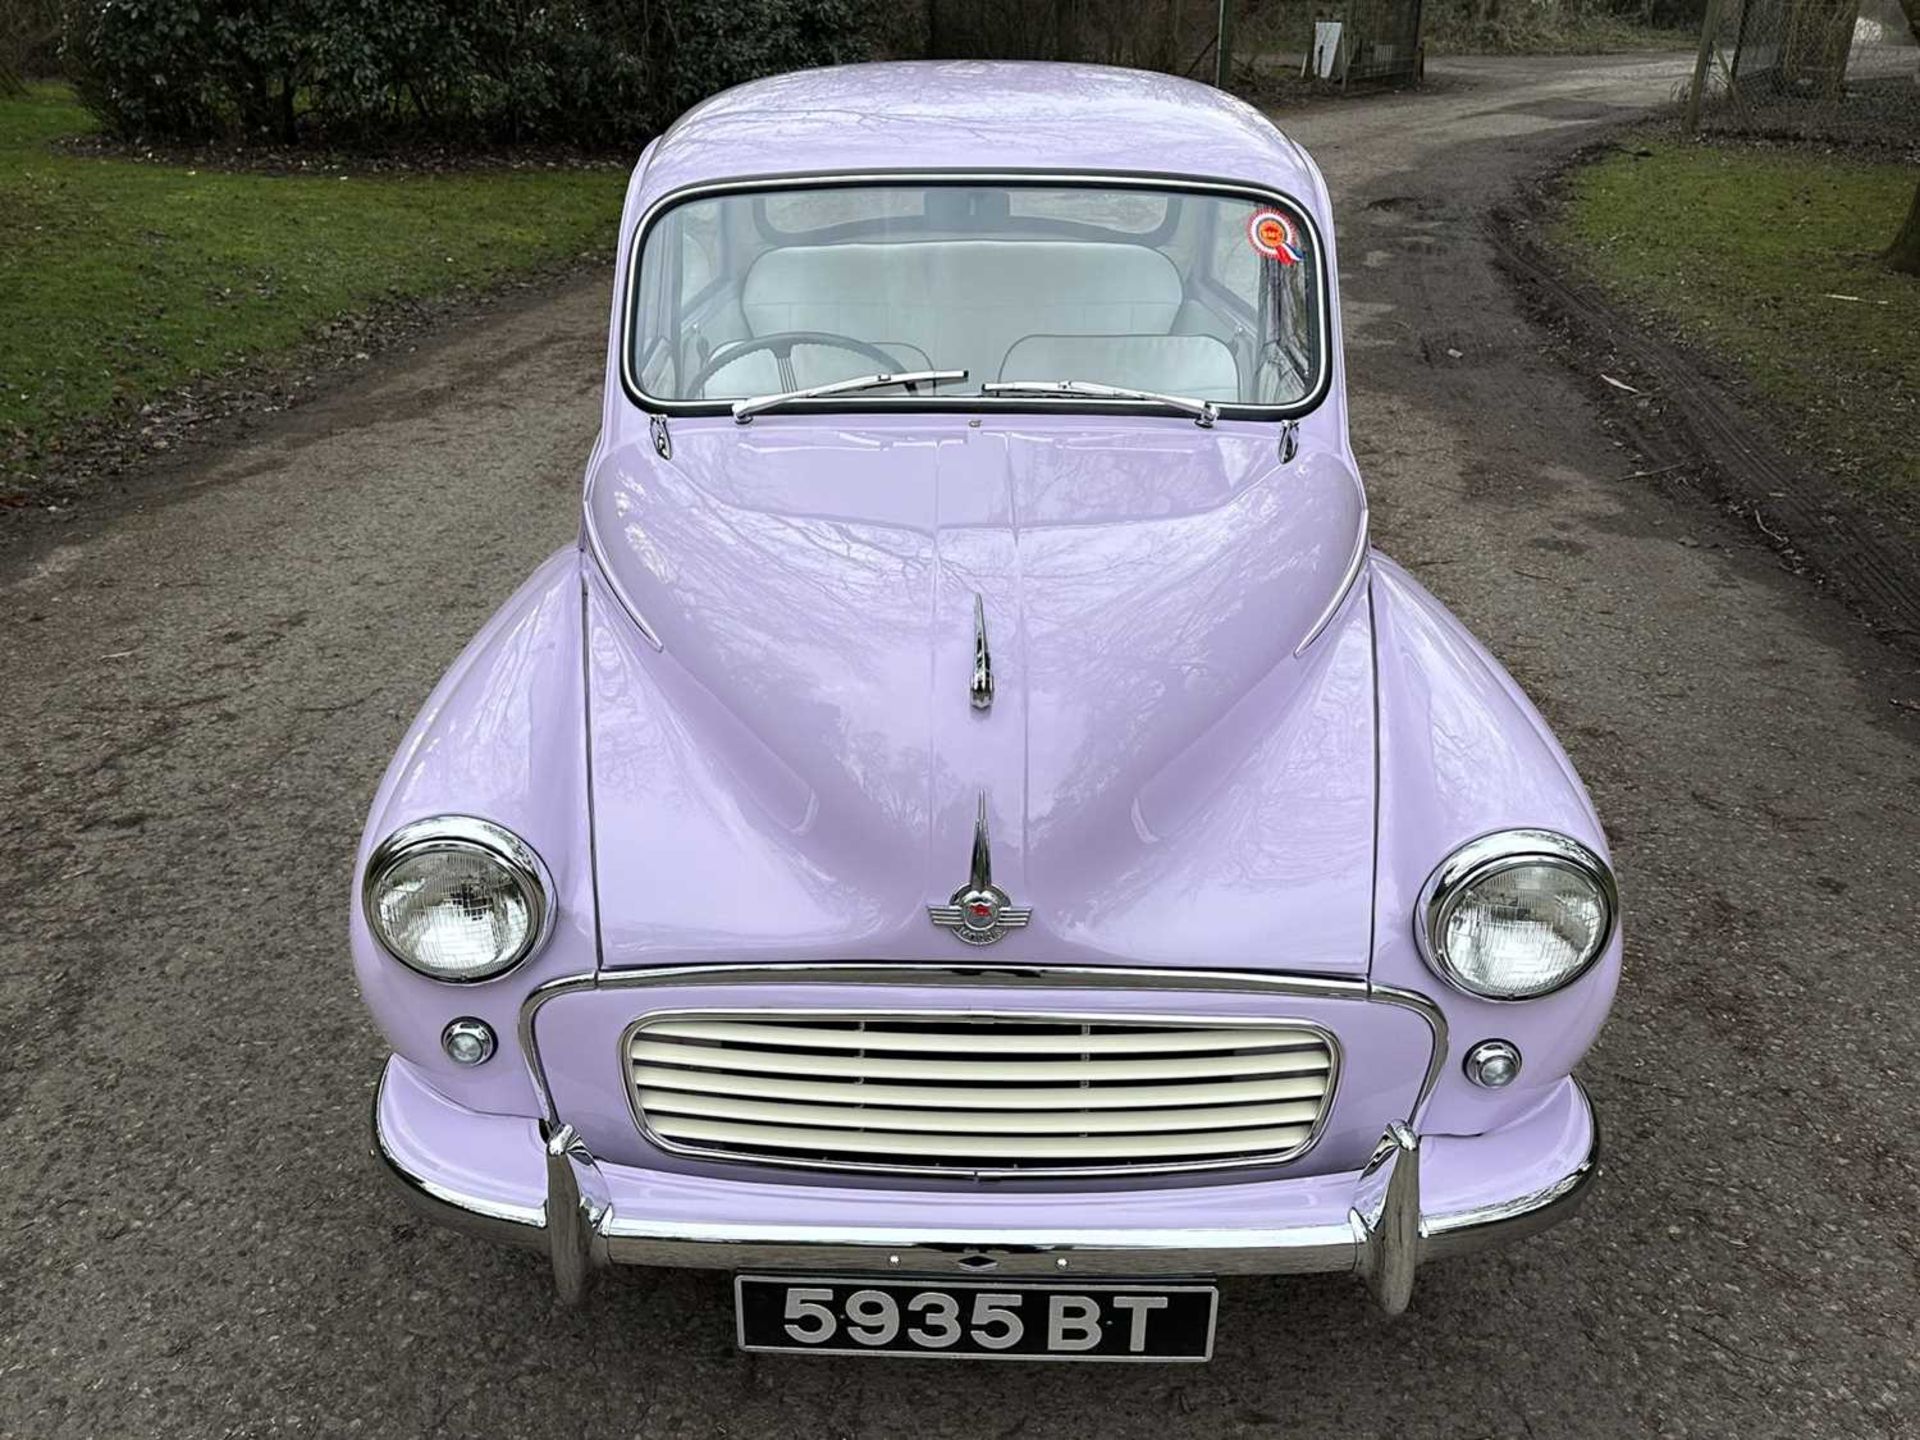 1961 Morris Minor Million 179 of 350 built, fully restored, only three owners from new - Image 15 of 100